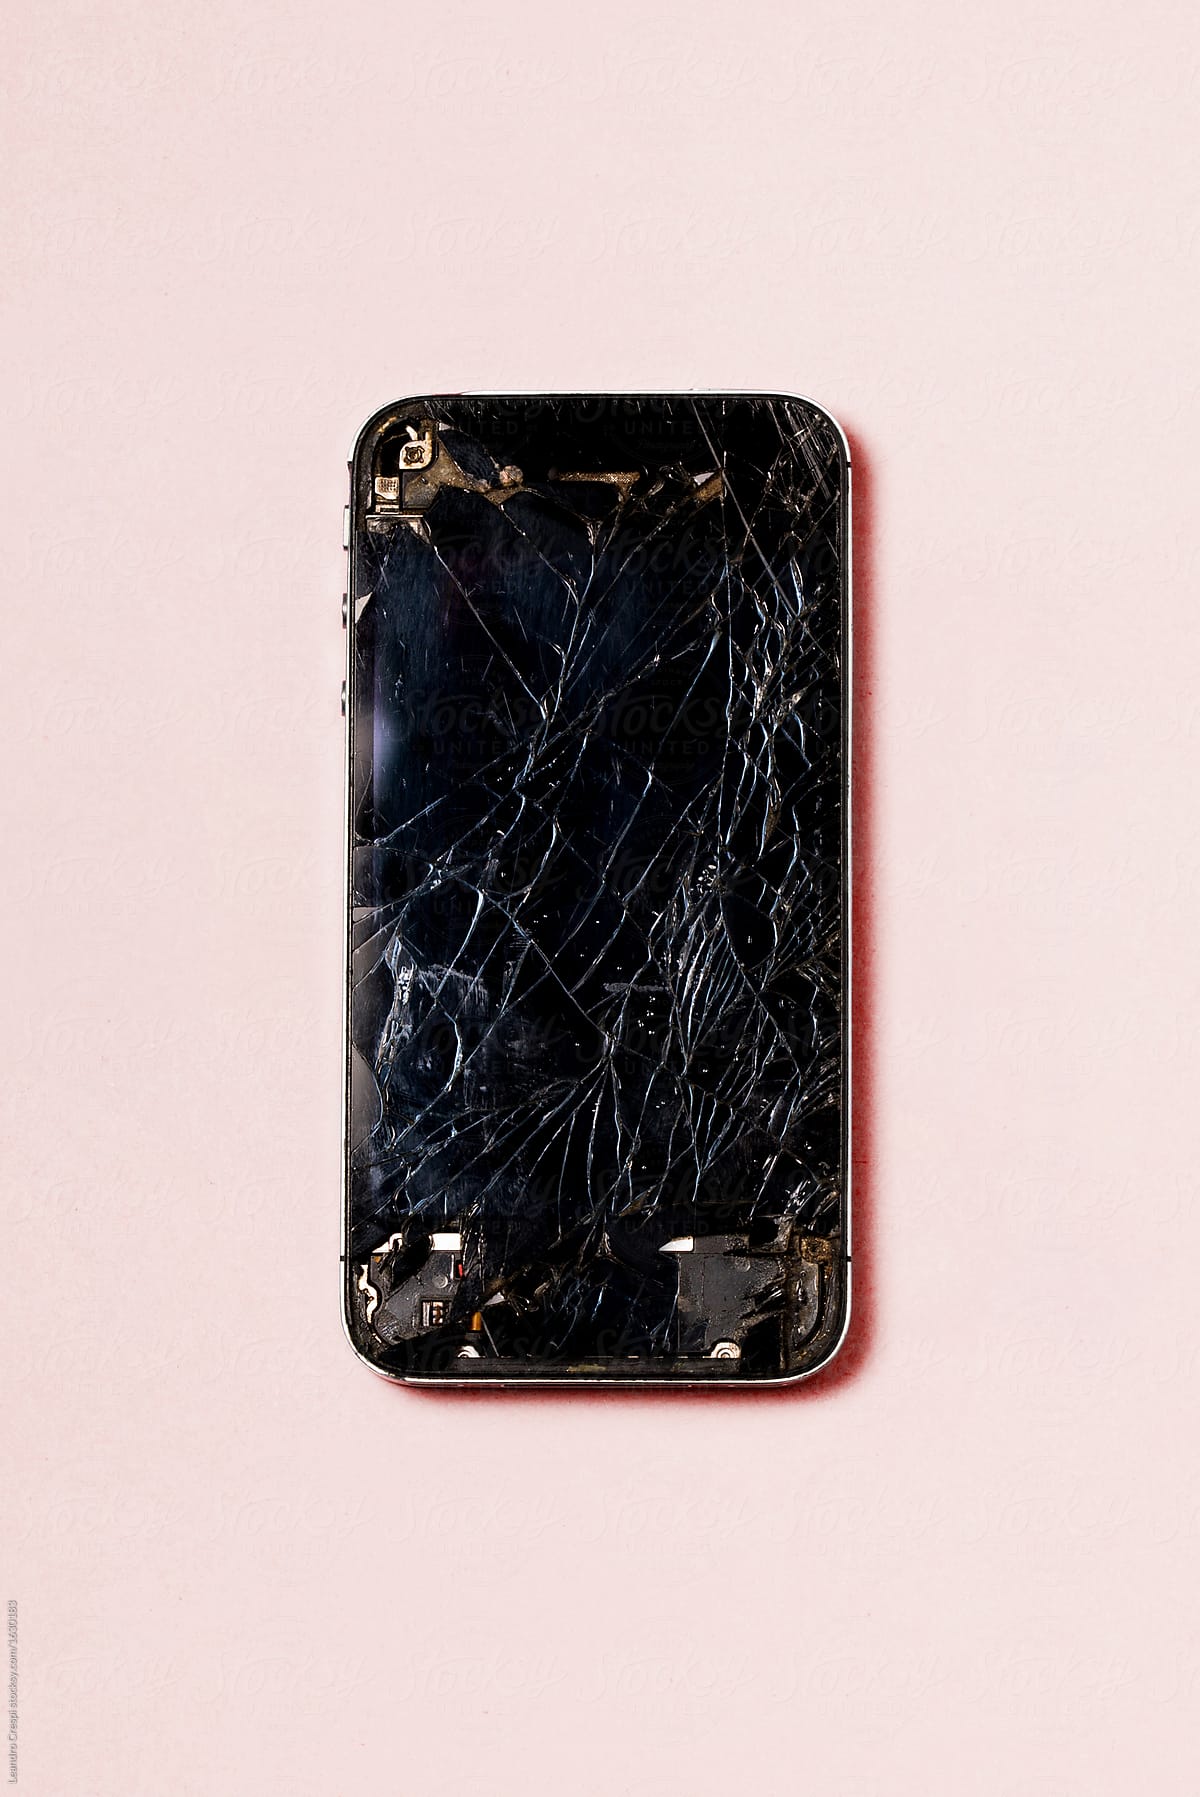 Smartphone with cracked screen over pink background